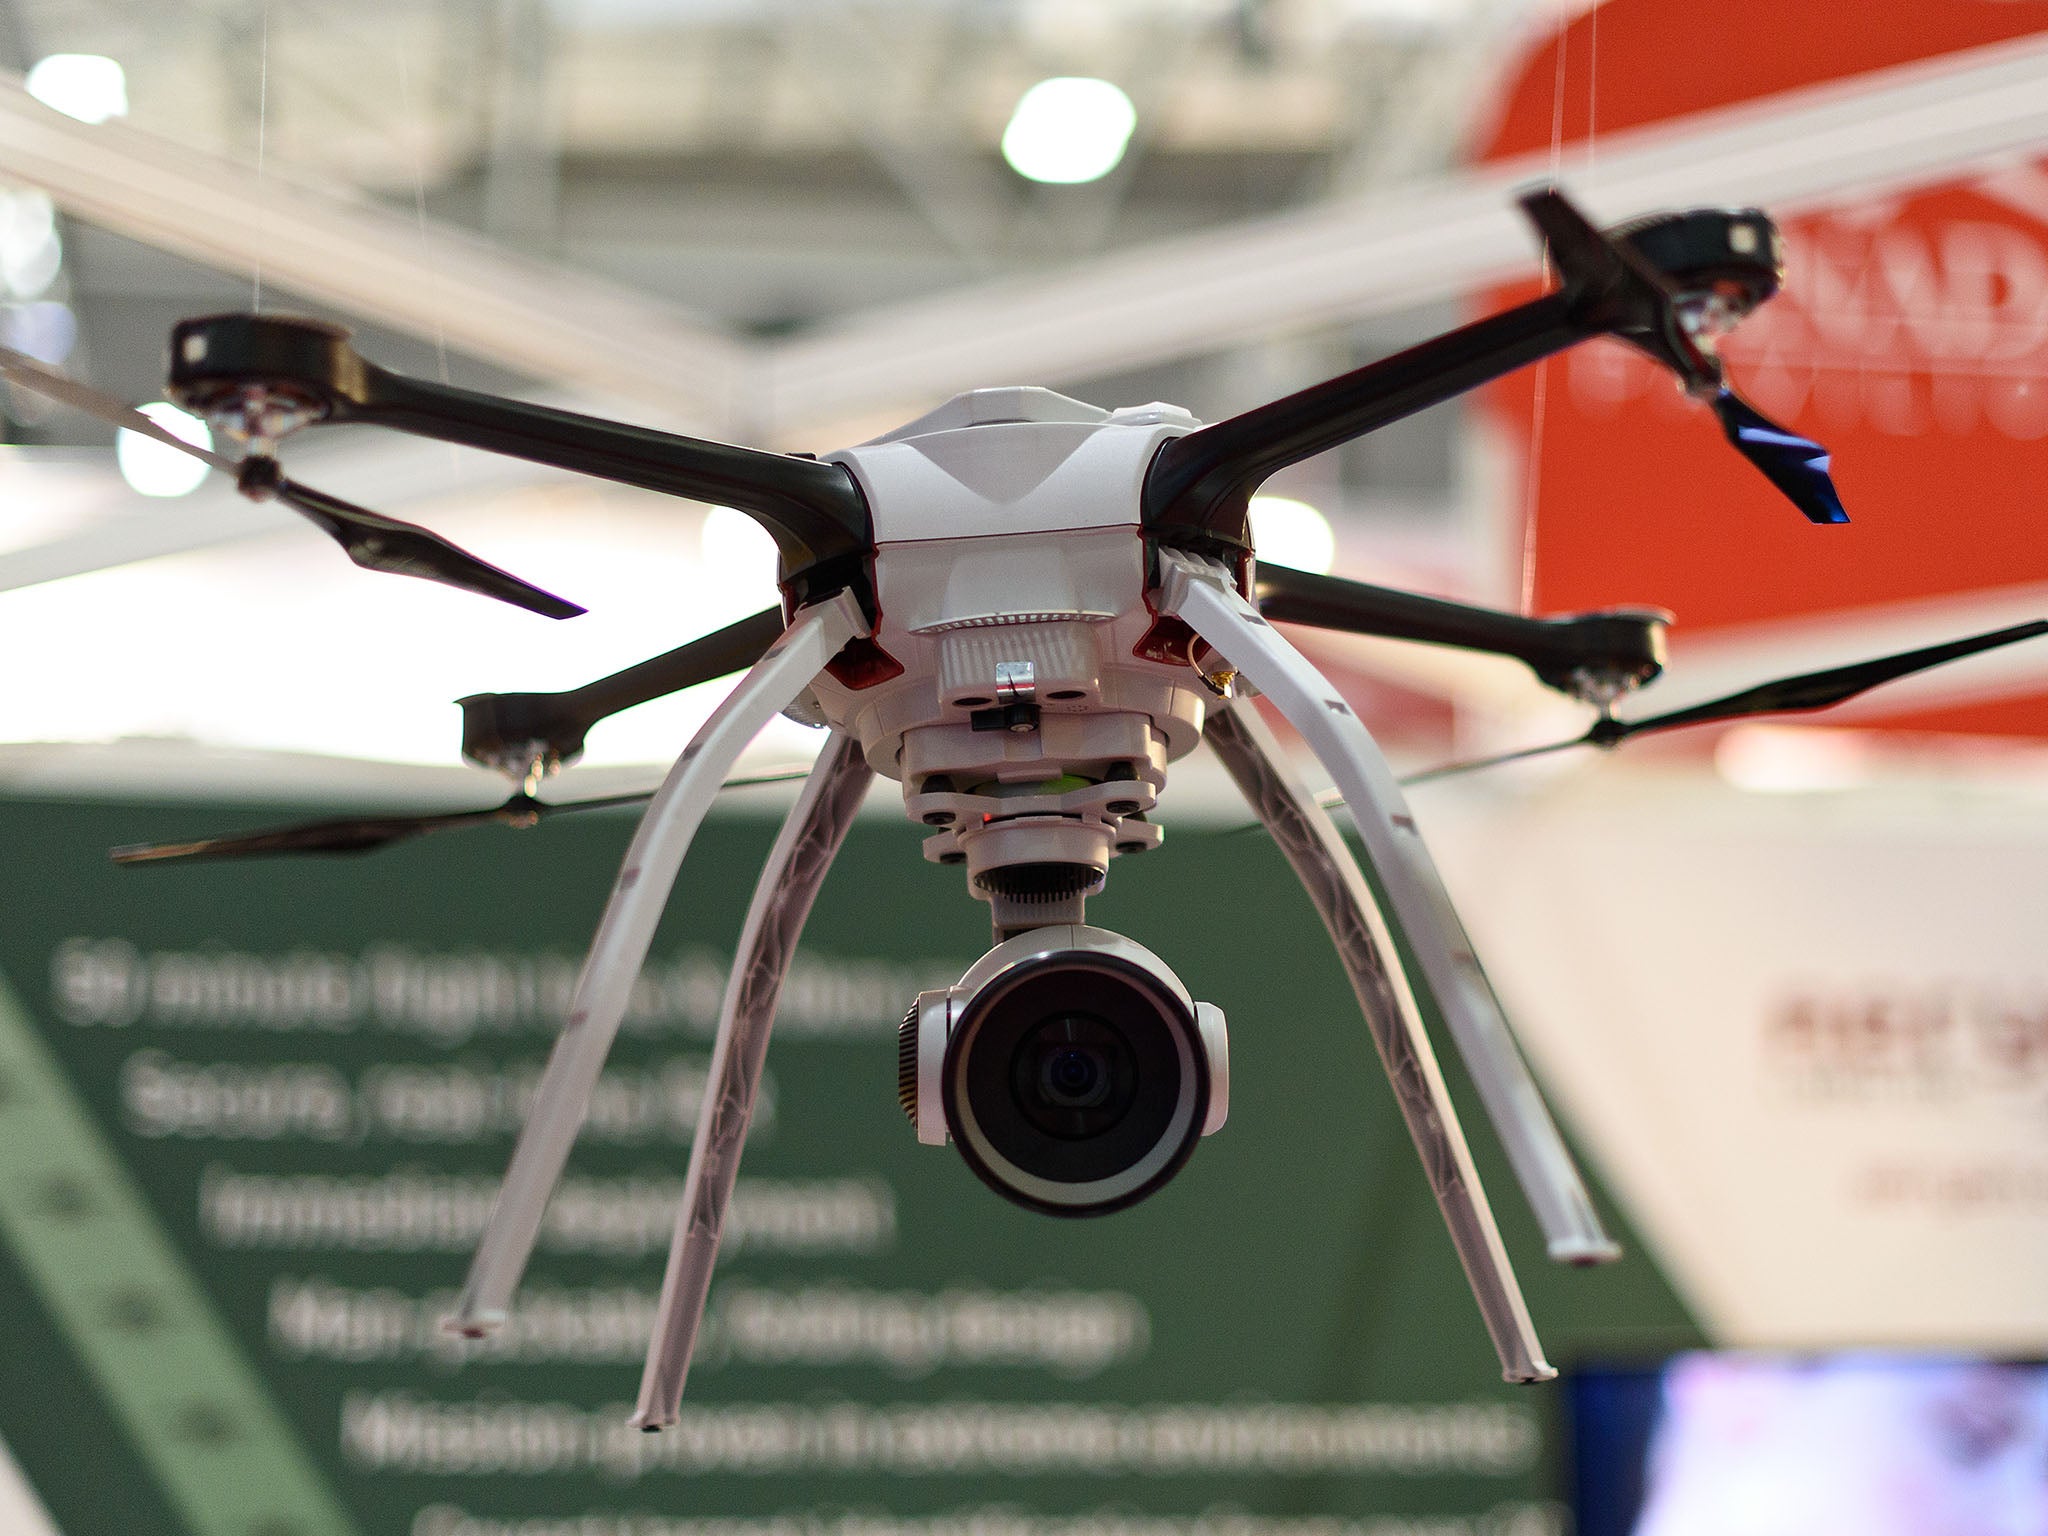 A drone on display at a technology fair in London (Getty Images)